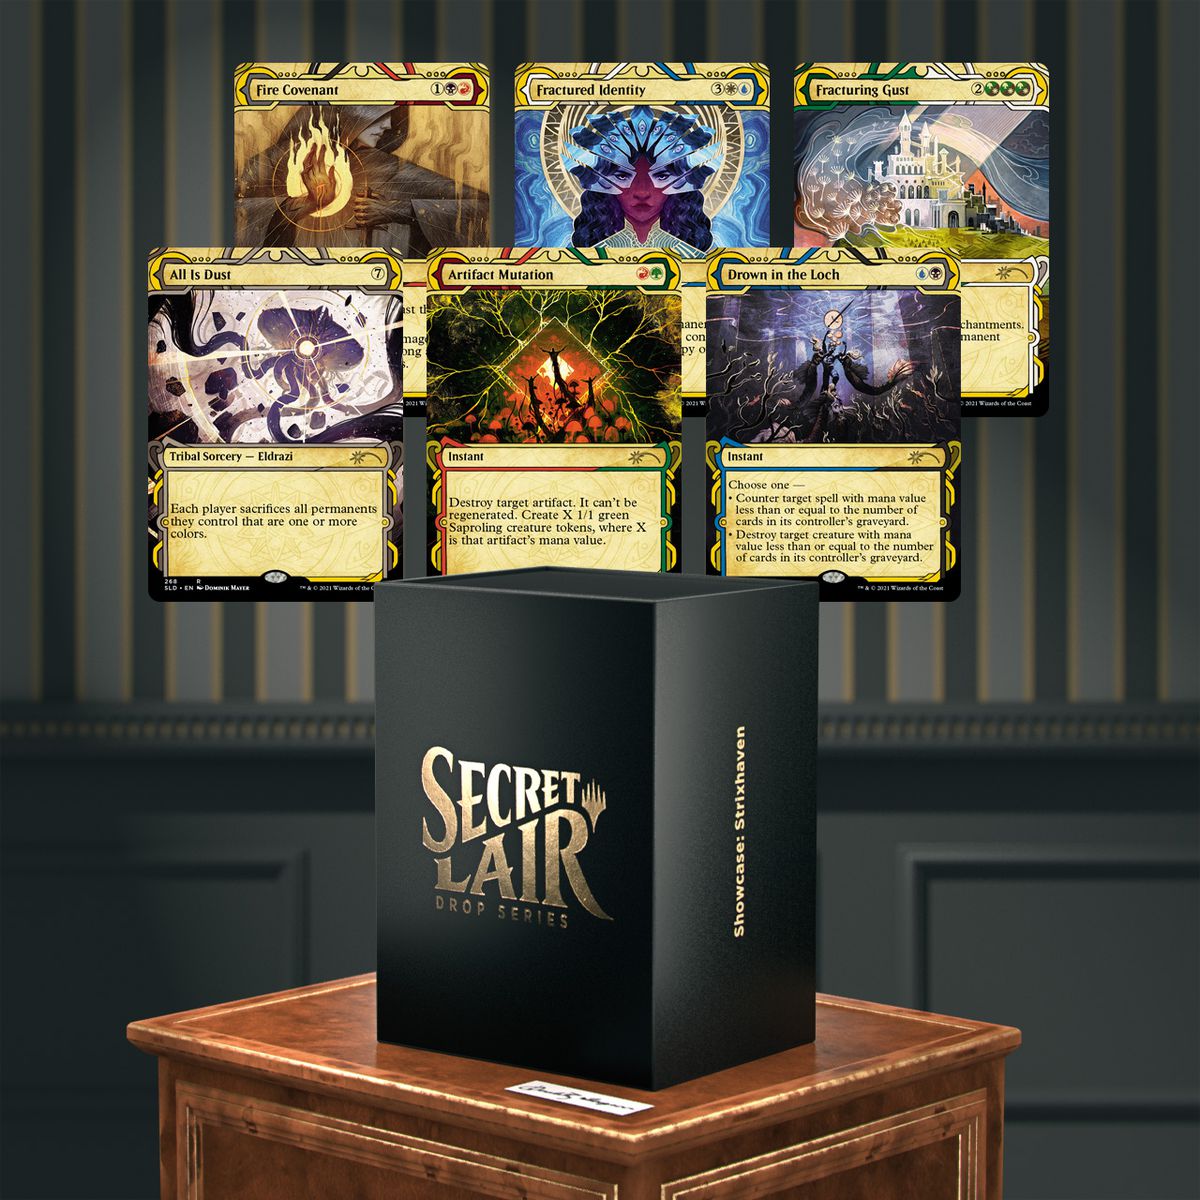 All six Strixhaven cards shown on a parlor wall, with a gilded Secret Lair box shown below.